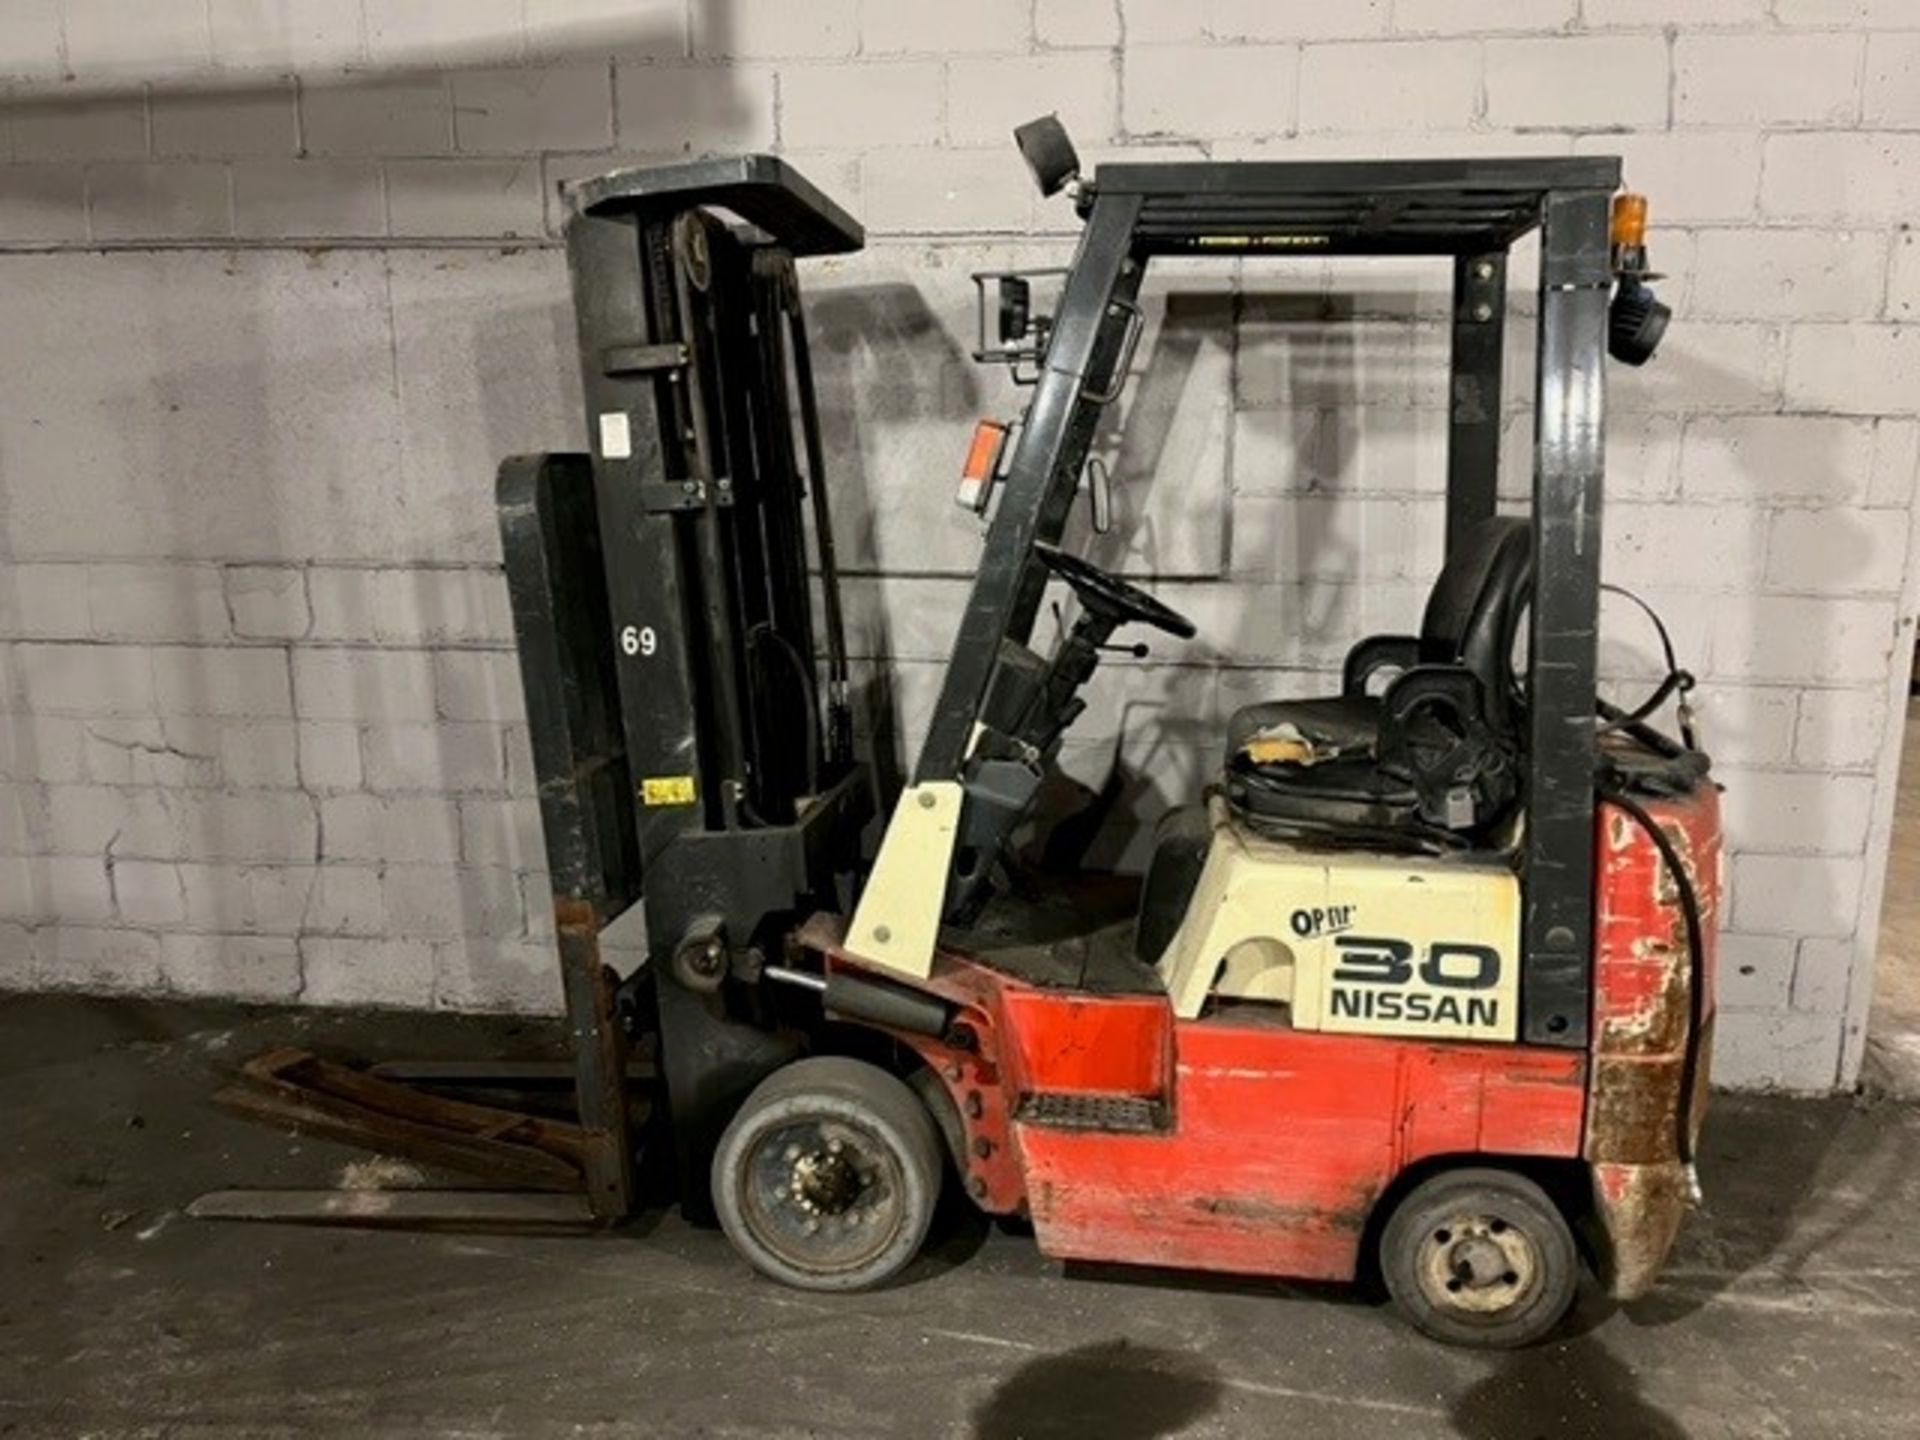 Consignment Item - located in Breese IL: Nissan 30 forklift